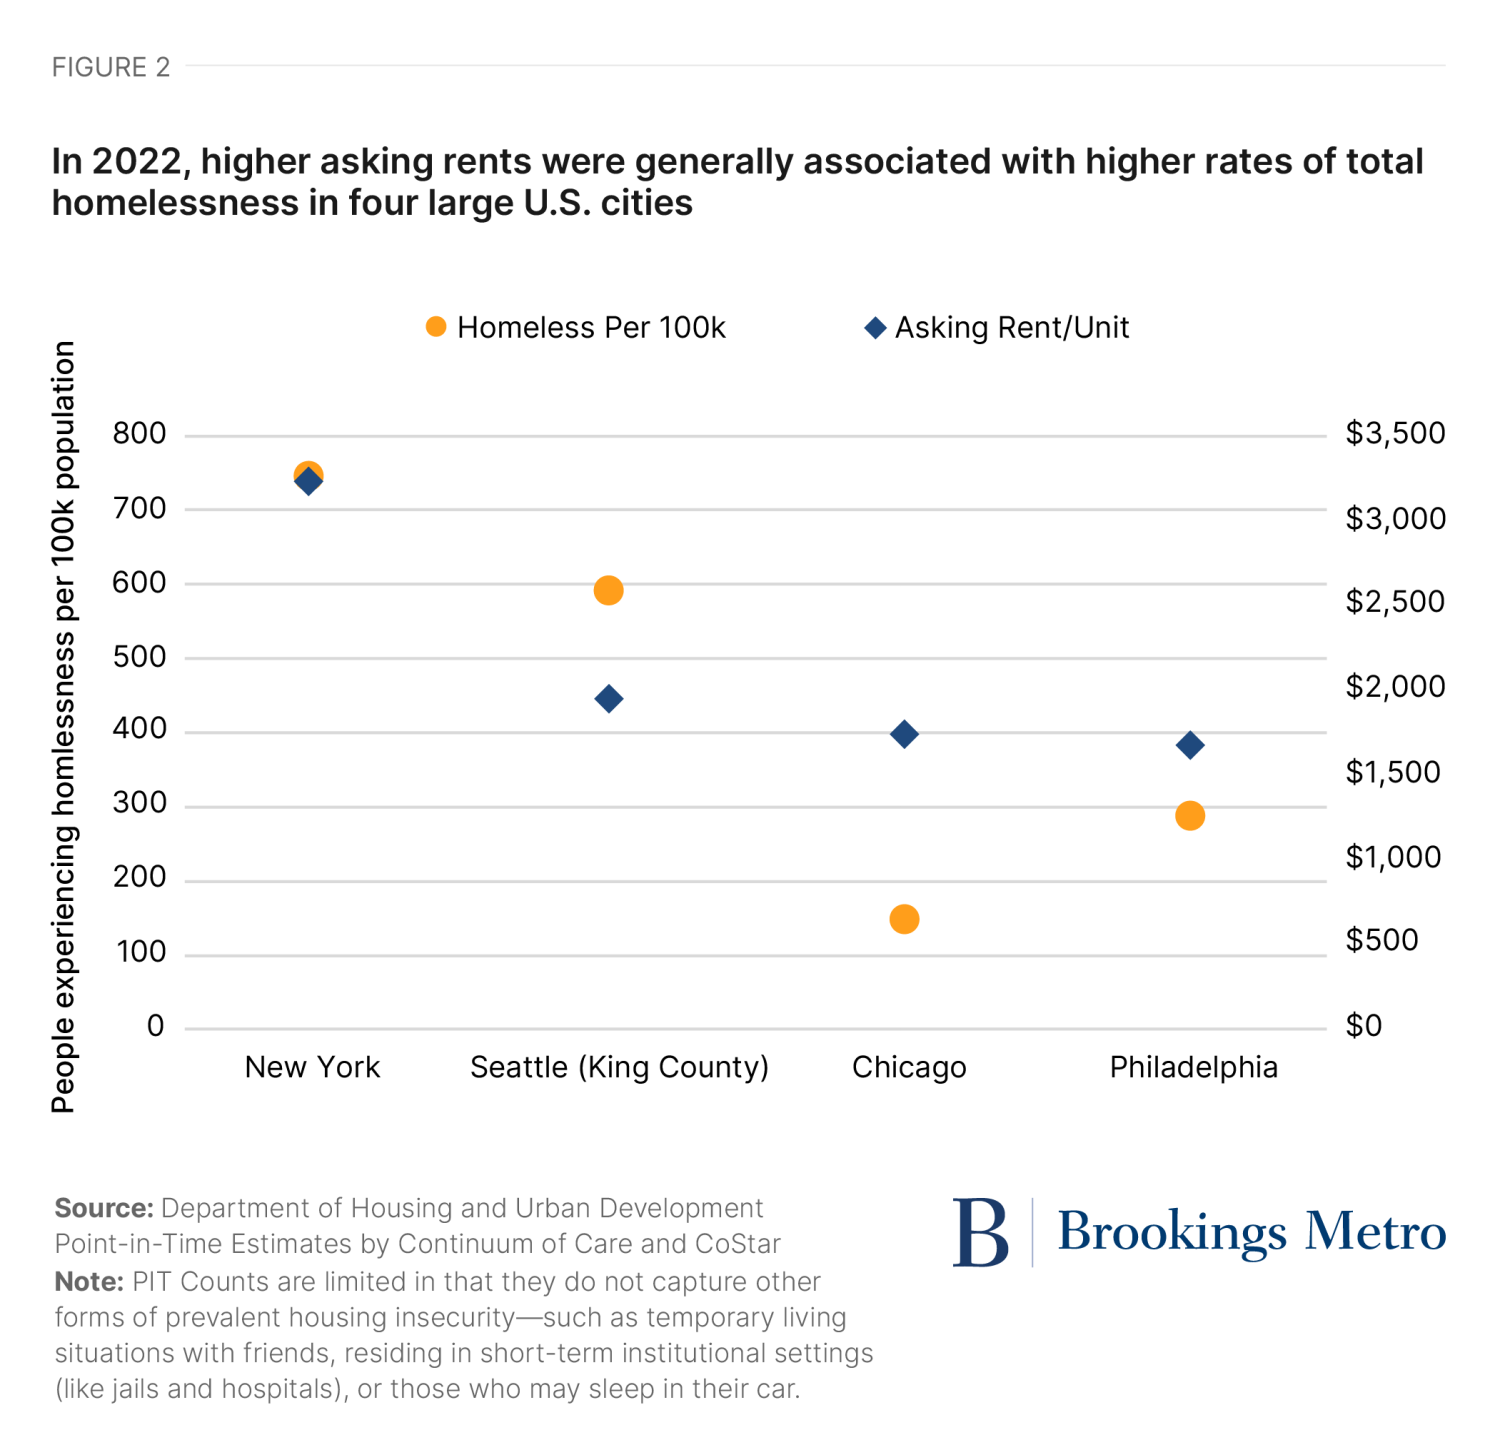 Figure 2. In 2022, higher asking rents were generally associated with higher rates of total homelessness in four large U.S. cities